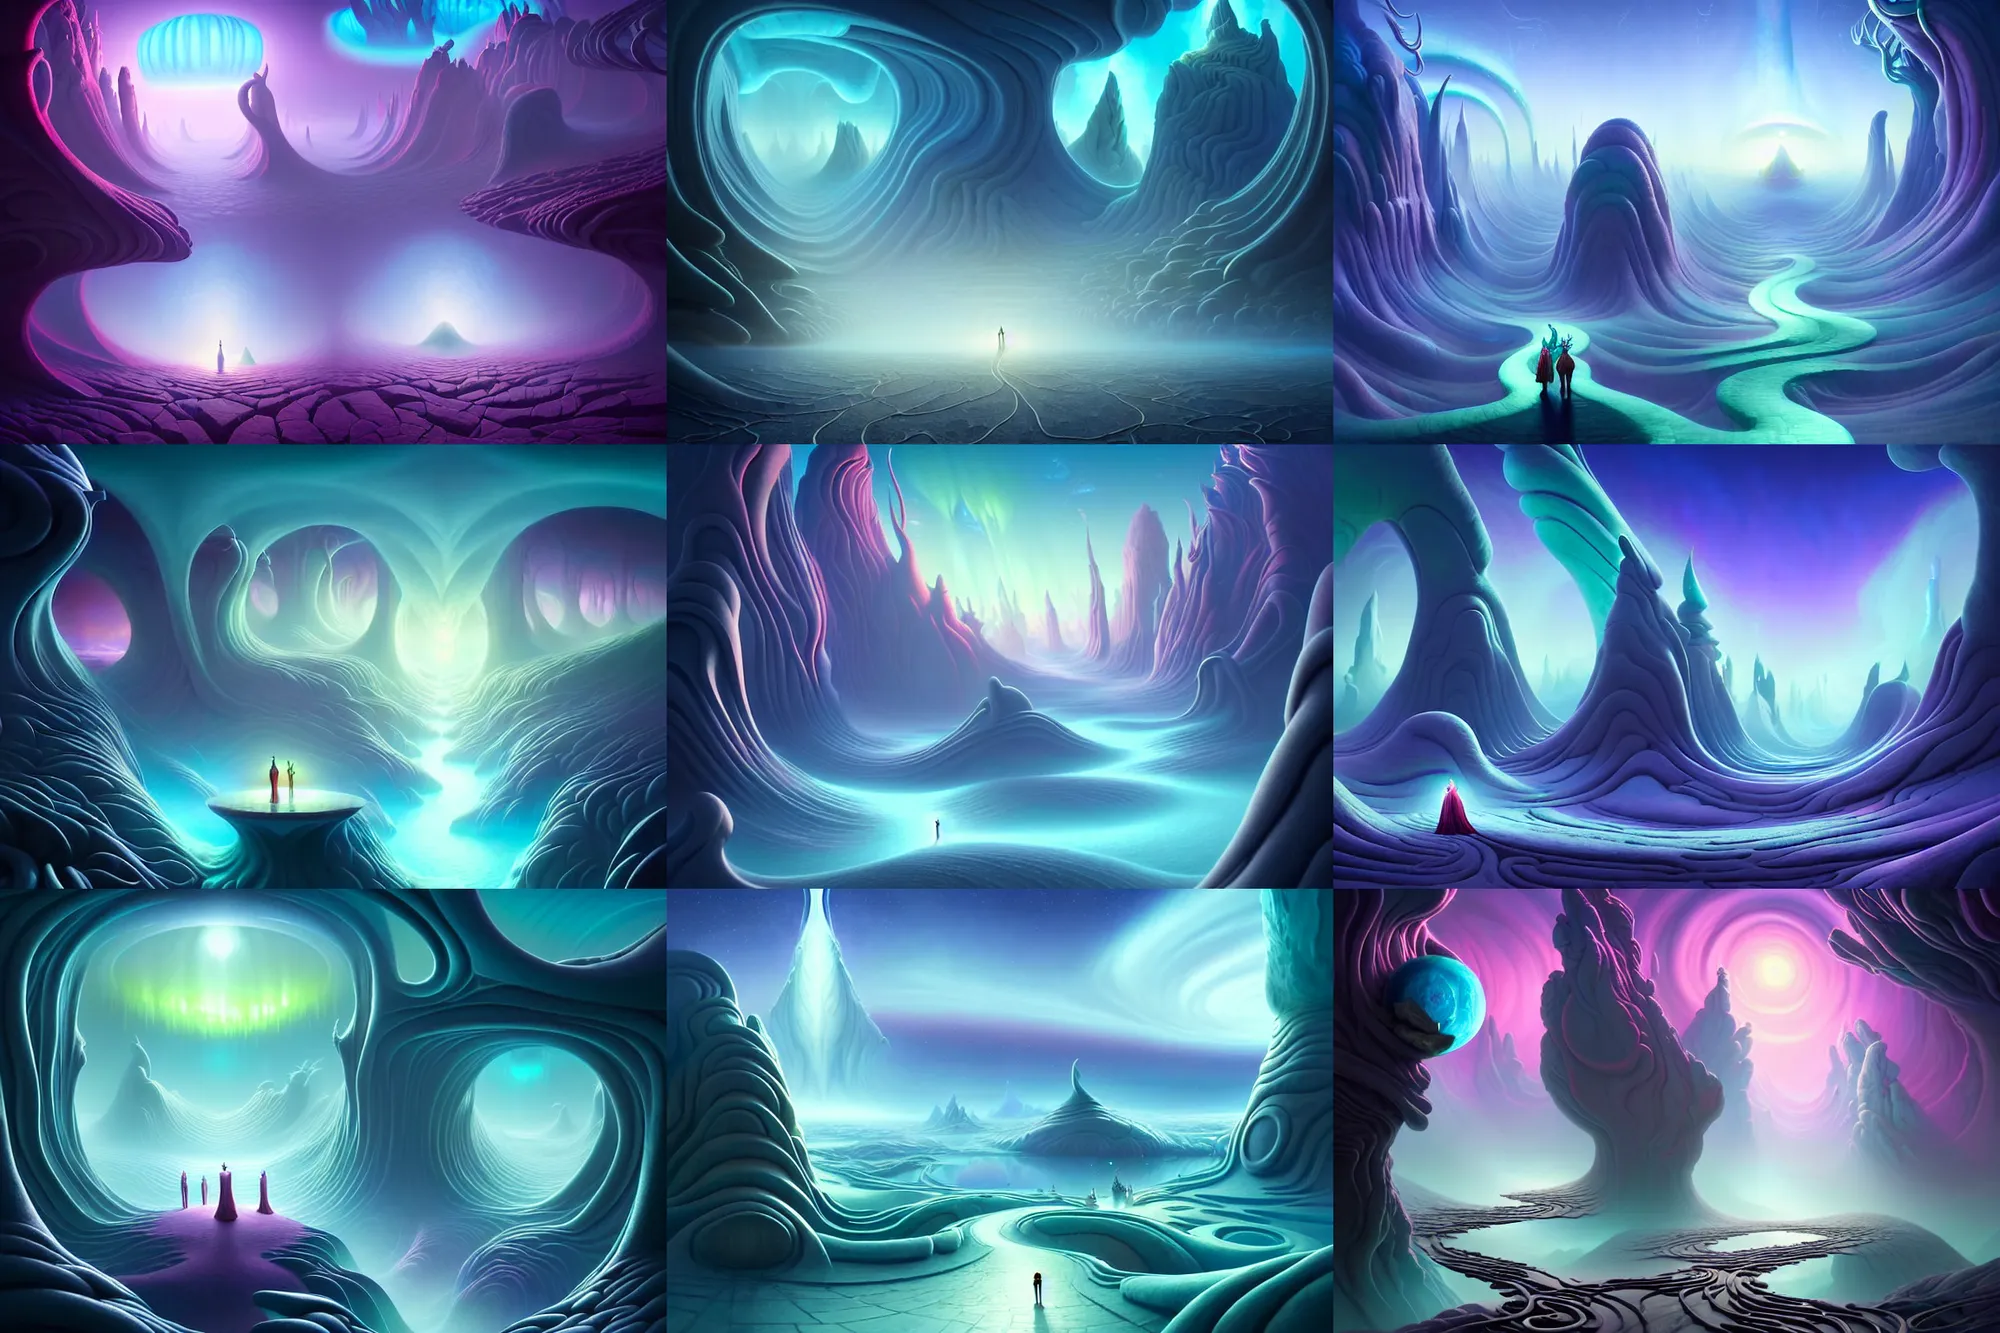 Prompt: a whimsical elite masterpiece mysterious sci - fi fantasy realism matte painting of a winding path through arctic dream worlds with surreal landscape and horizon inspired by heironymous bosch's garden of earthly delights, surreal ice interiors by asher durand and cyril rolando and natalie shau, insanely detailed and intricate, elegant, northern lights, synthwave, cyberpunk